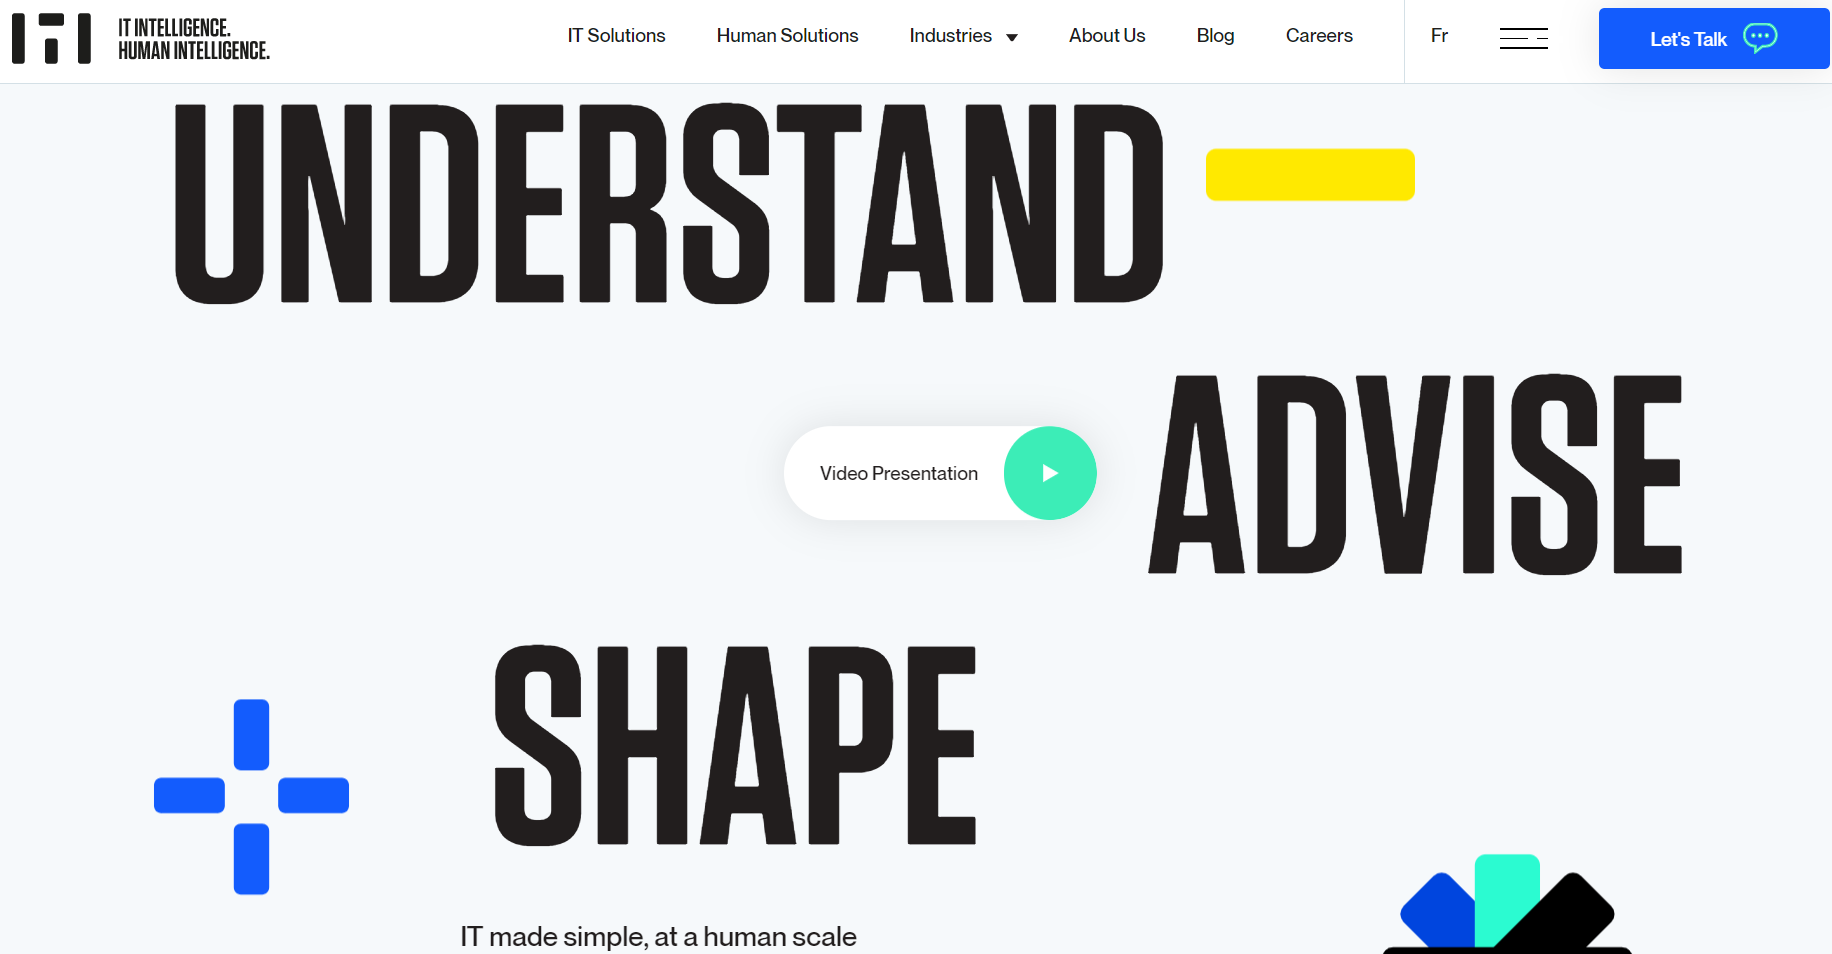 ITI's corporate website features interesting typography and intuitive navigation